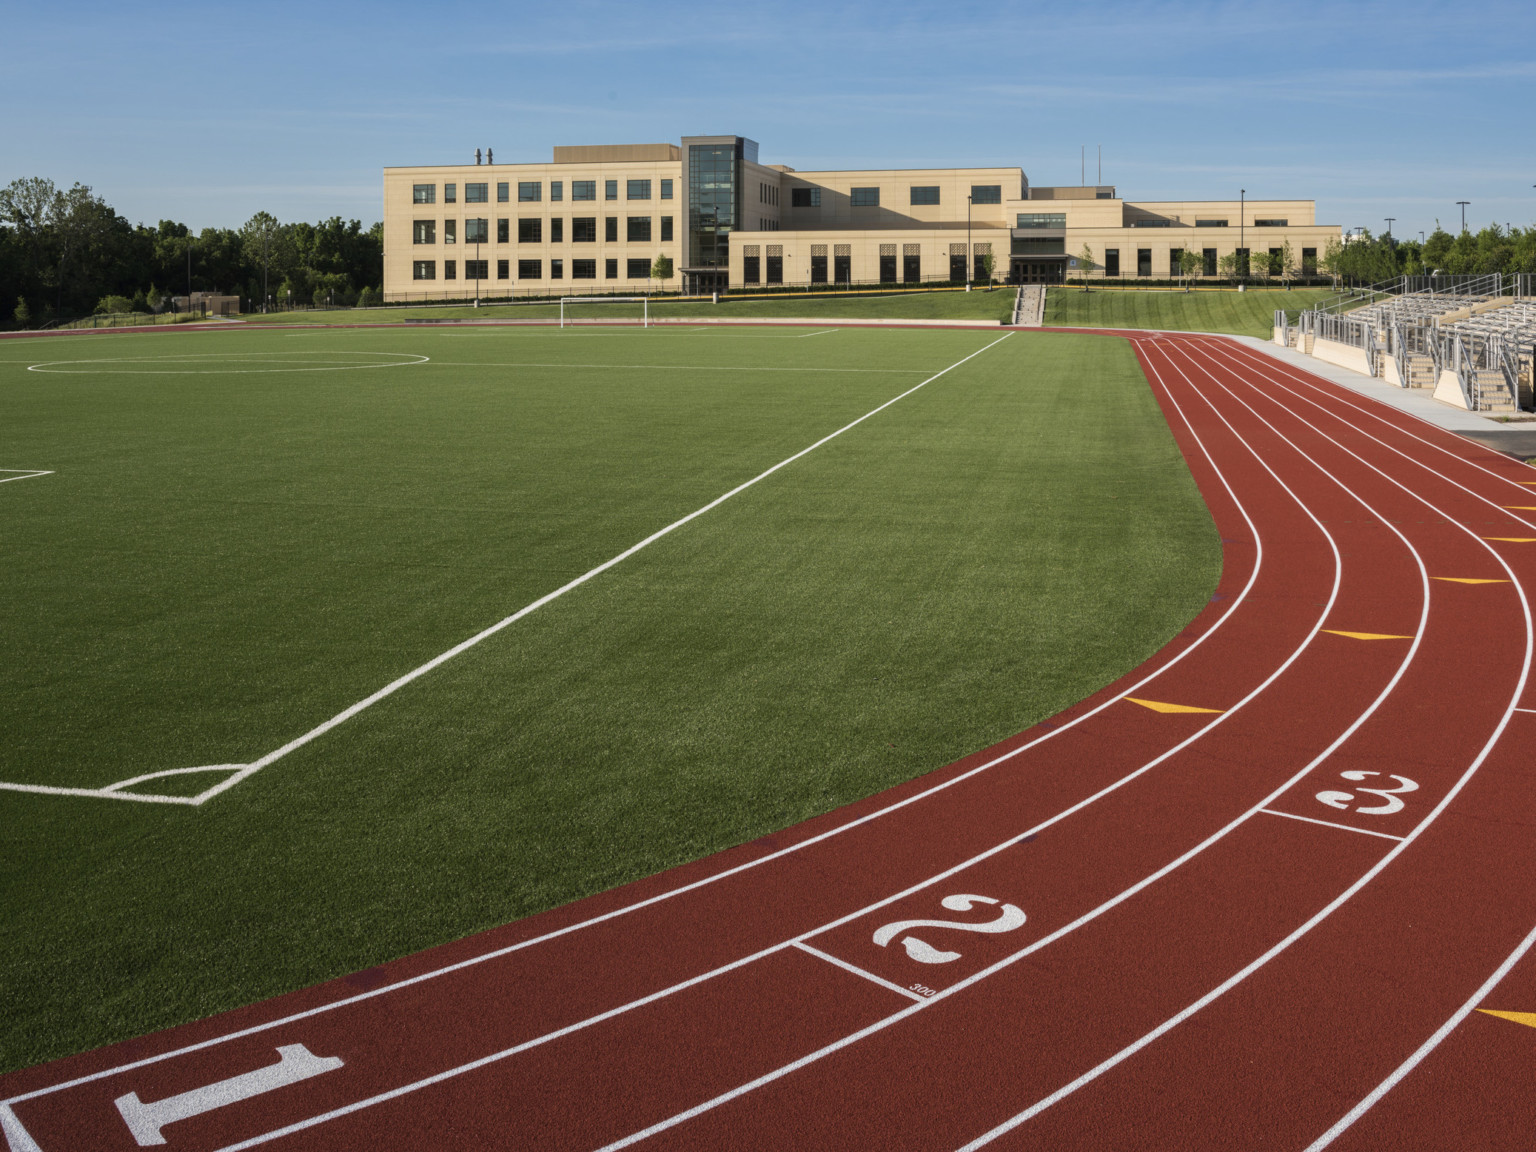 red colored track of a school's track and field athletic field, a light precast concrete building is in the distance